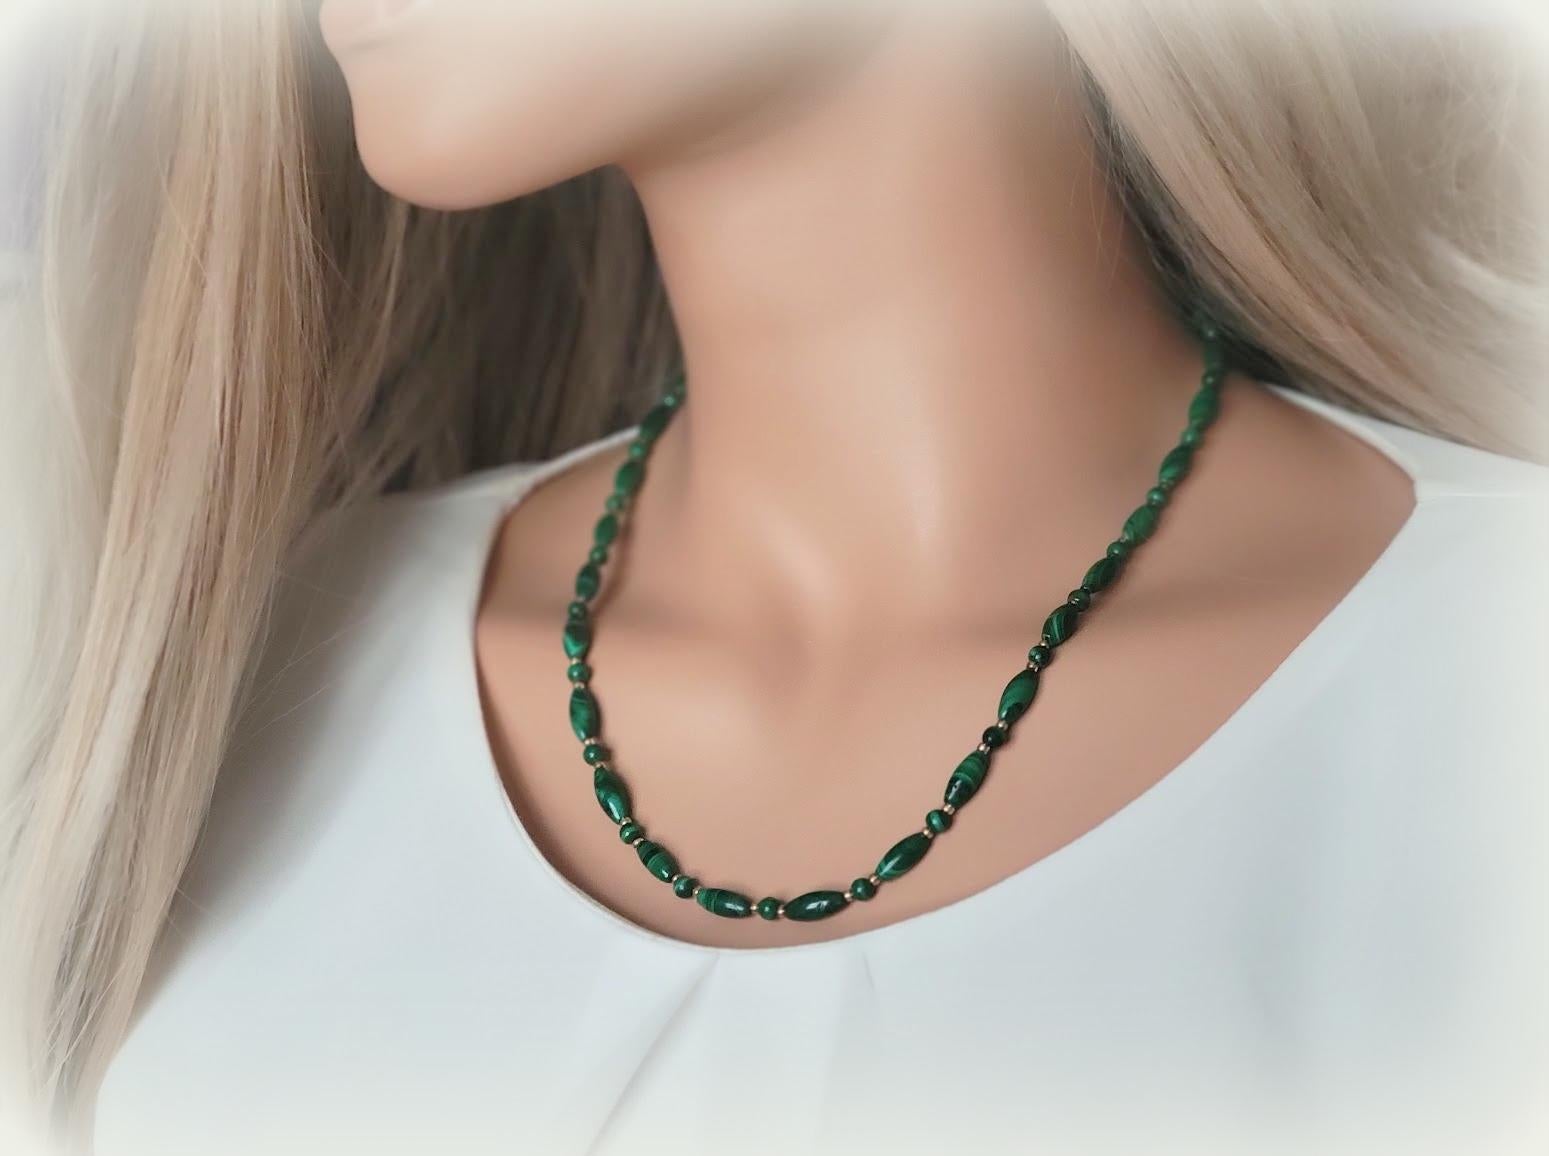 Vintage Malachite Necklace In Excellent Condition For Sale In Chesterland, OH